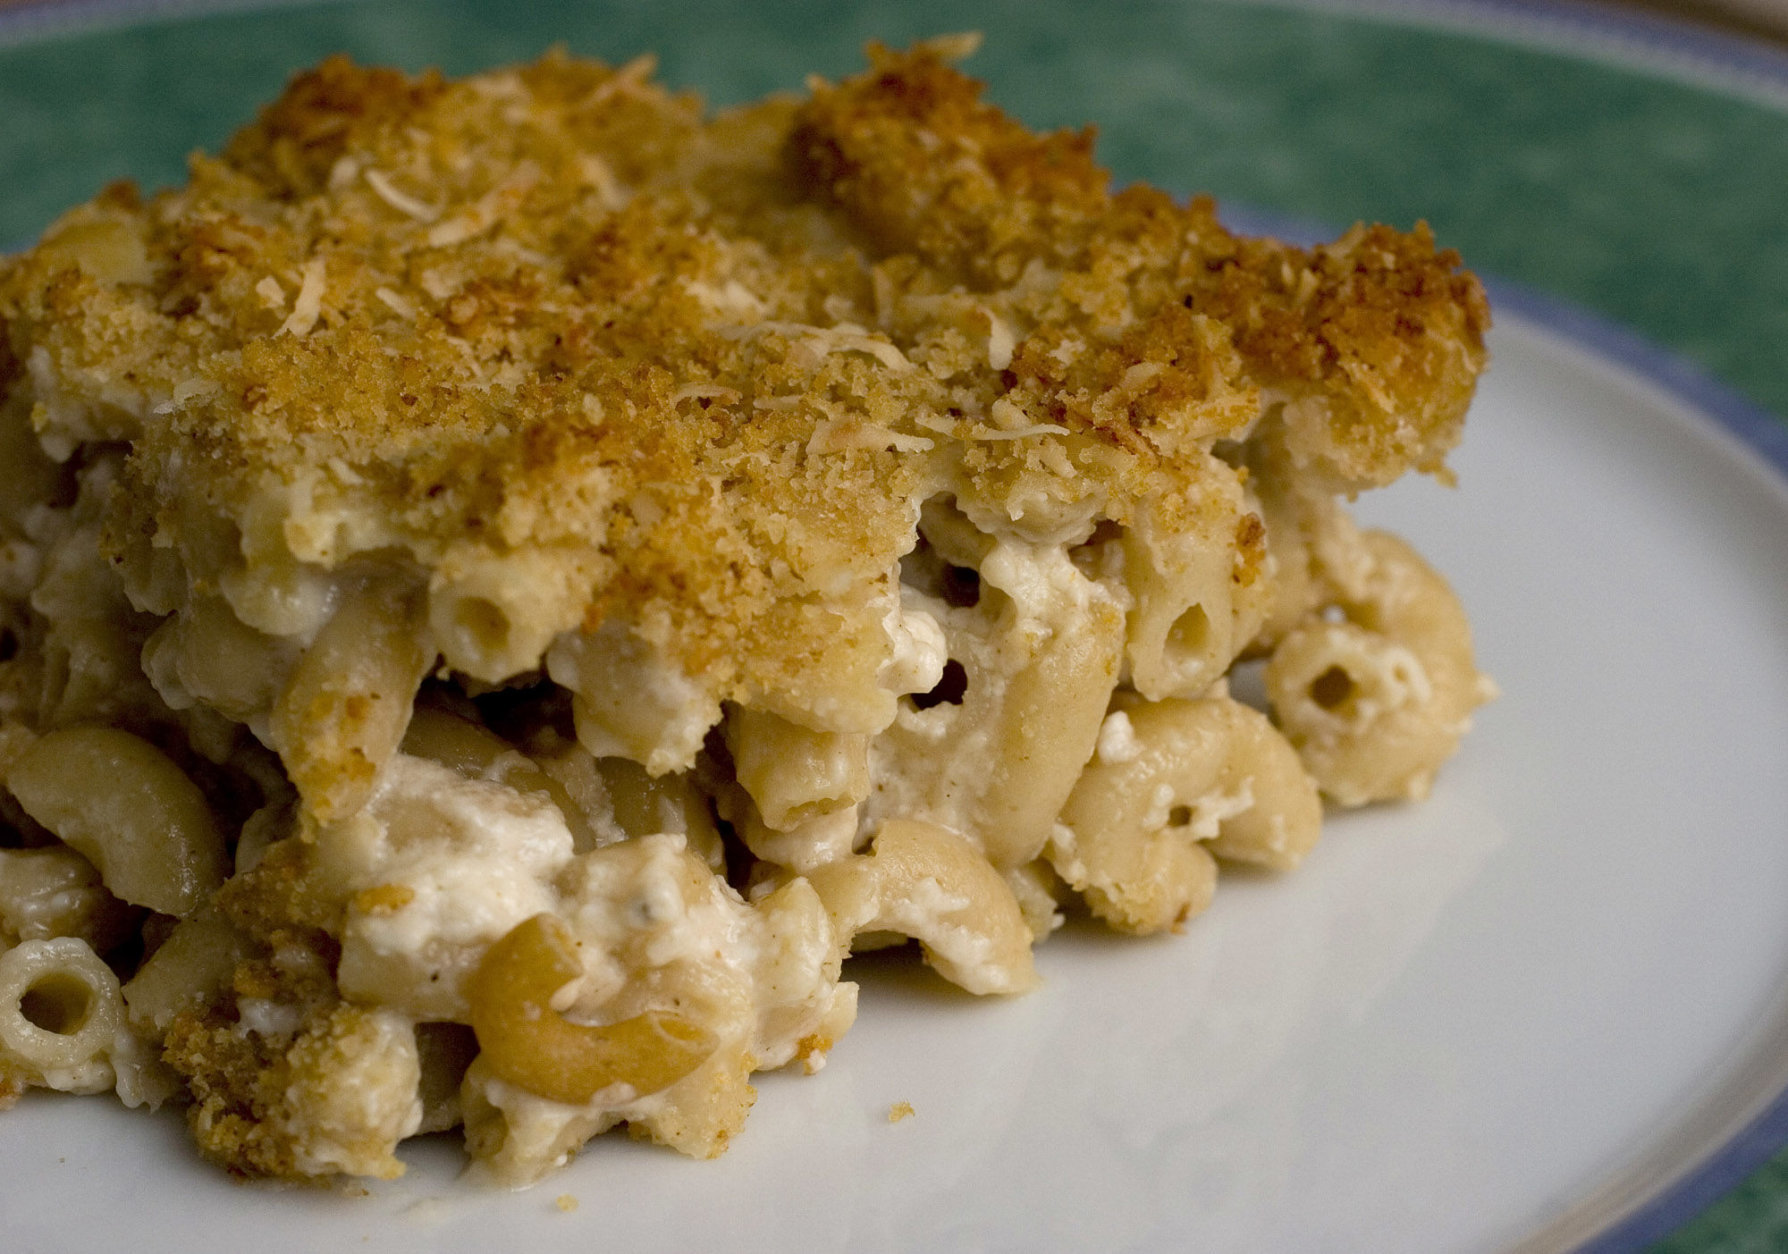 **FOR USE WITH AP LIFESTYLES** Comfort food does not have to also mean unhealthy. A few careful ingredient changes from the classic recipe gives this Macaroni and Cheese Light, shown on Jan. 29, 2008, the flavor you look for with much less fat. (AP Photo/Larry Crowe)